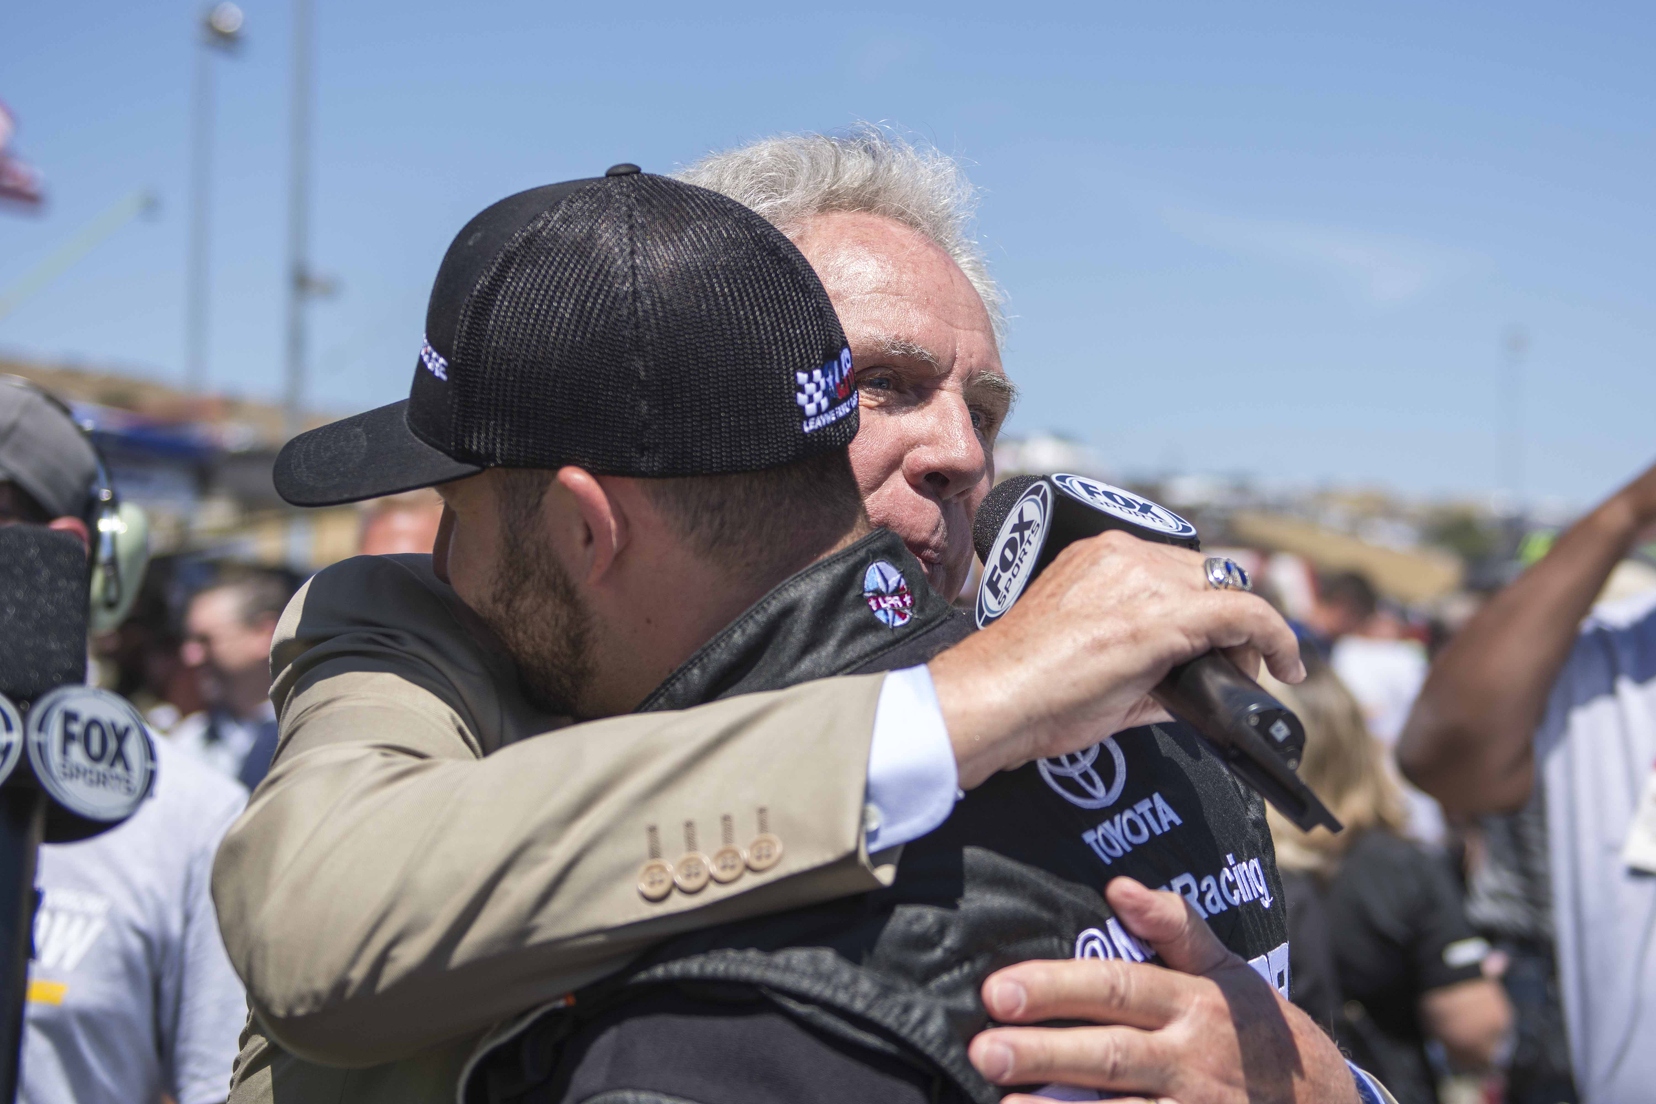 Darrell Waltrip and Matt DiBenedetto share a hug during pre-race ceremonies for Waltrip's final broadcast. Photo courtesy of Patrick Sue-Chan for Speedway Media.